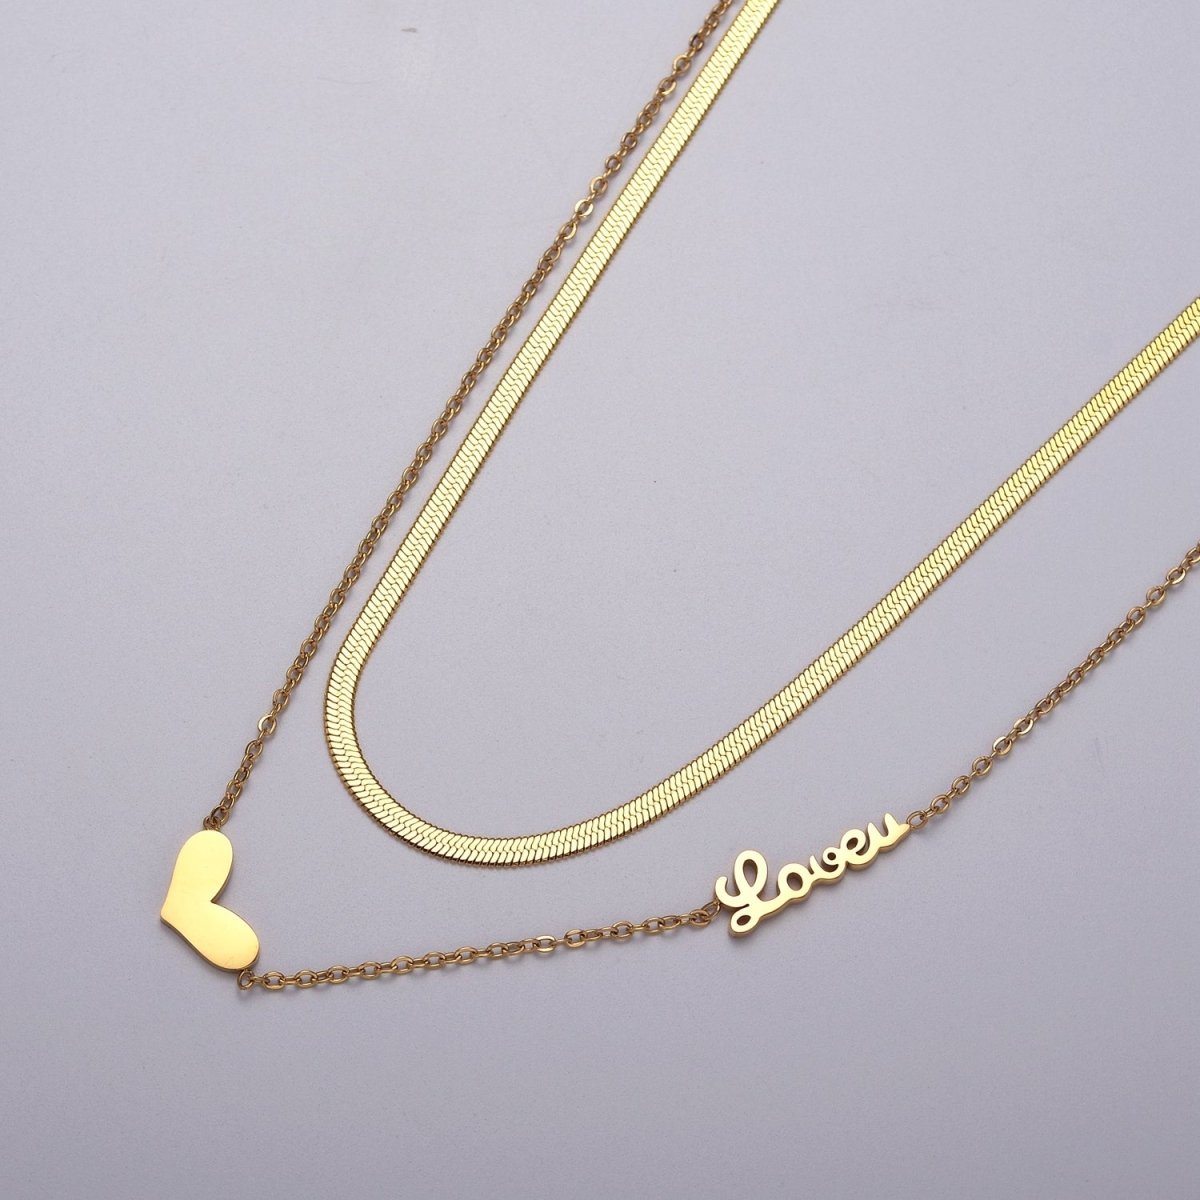 Clearance Pricing BLOWOUT Double Layer Herringbone Chain Necklace, Gold Love Charm Necklace Set WA-920 - DLUXCA